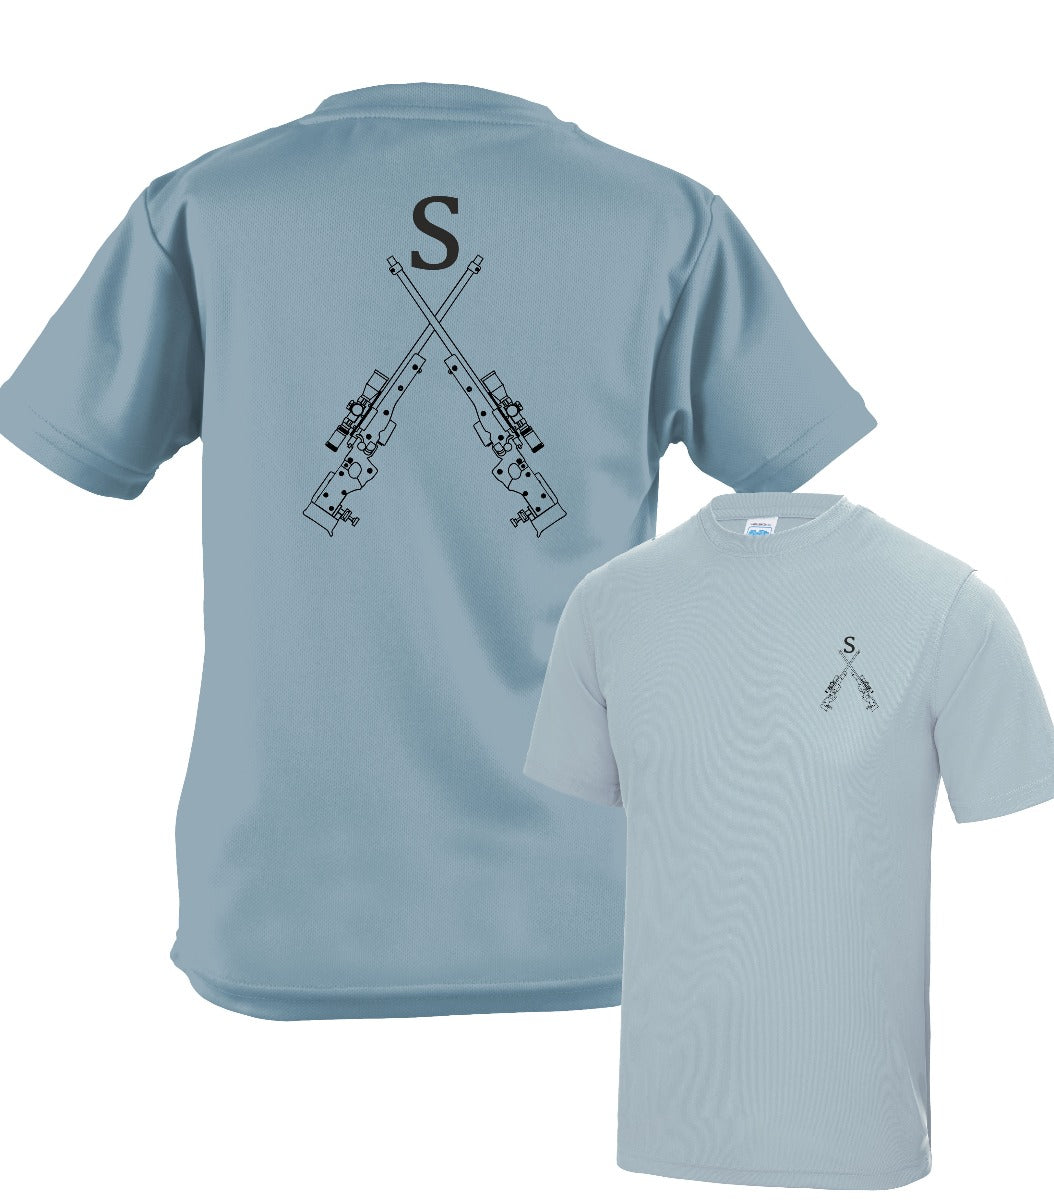 Double Printed Sniper Wicking T-Shirt